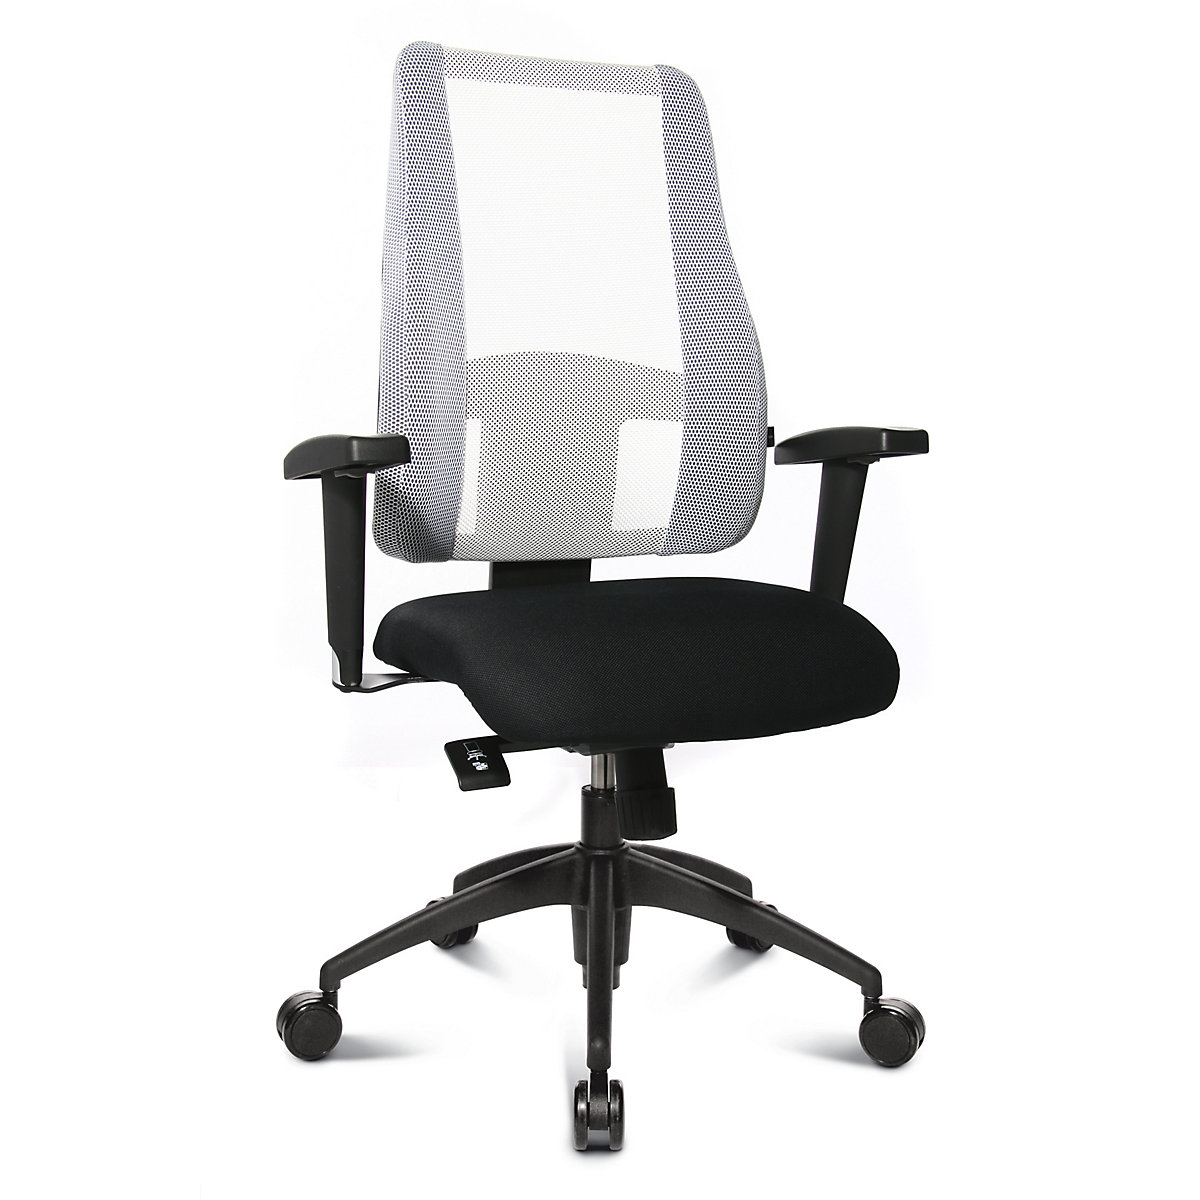 LADY SITNESS DELUXE office swivel chair – Topstar, flexible with 7 zones, black / white-1